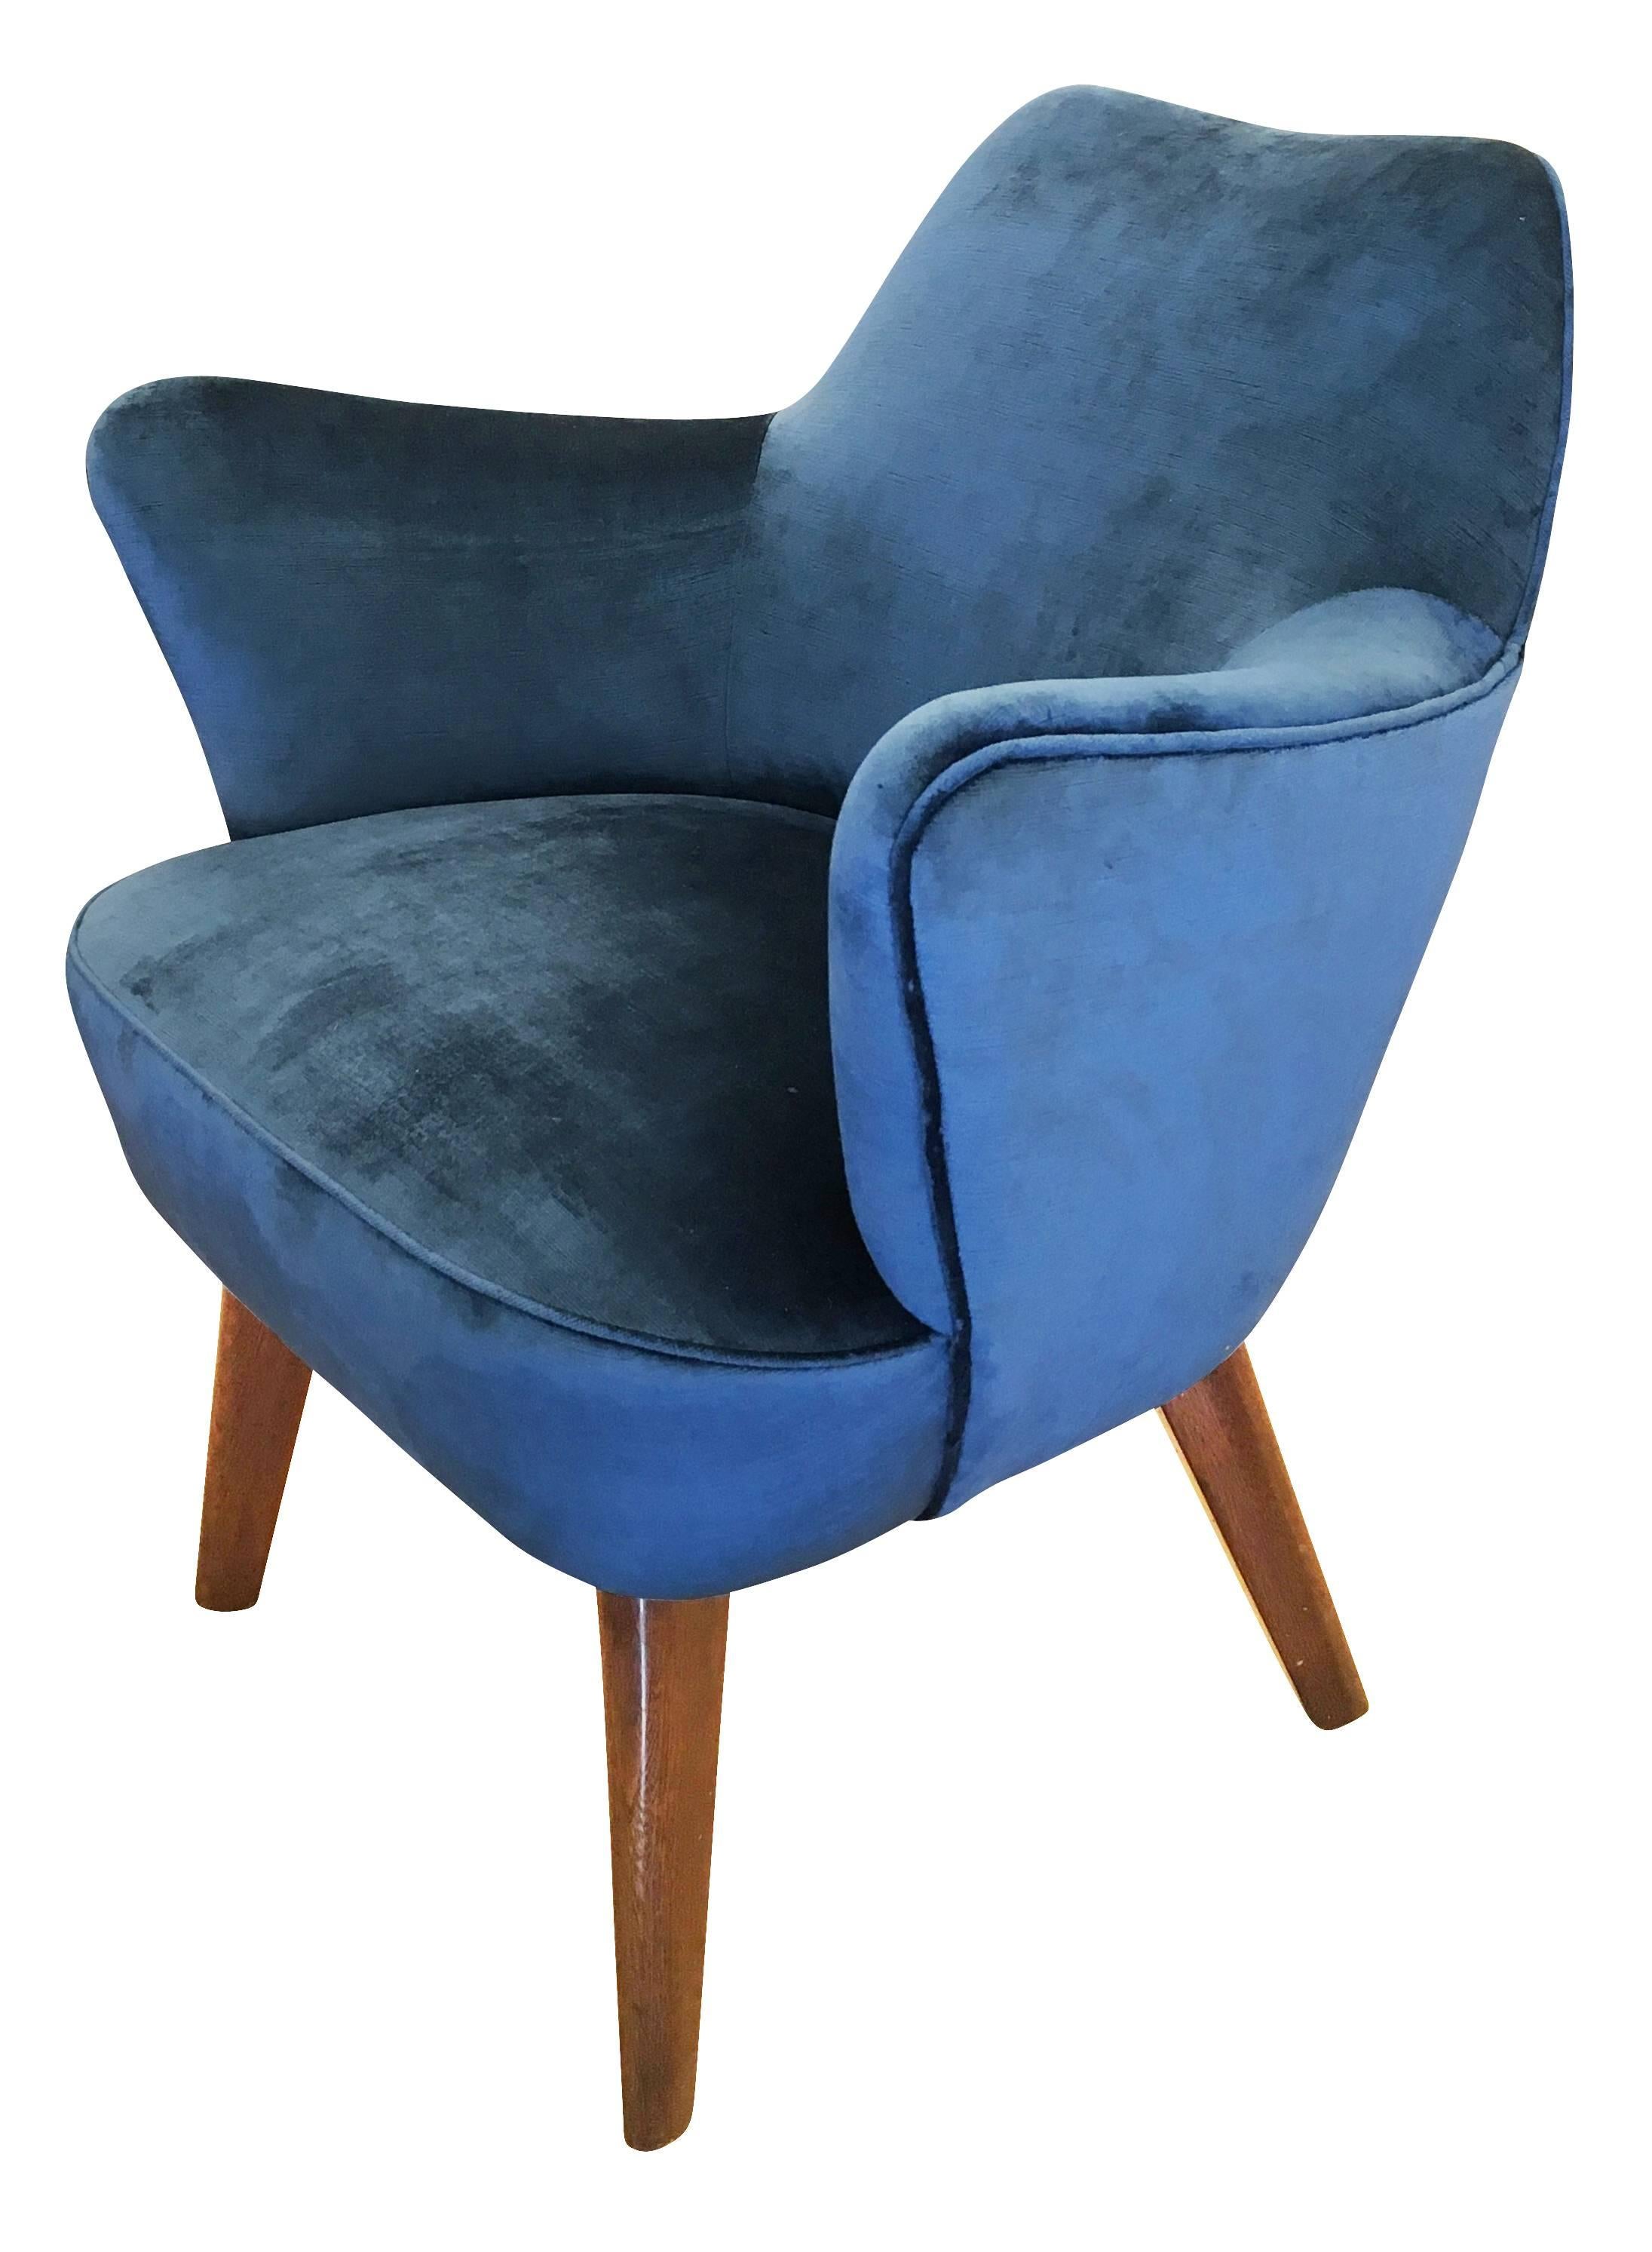 Mid-Century Modern Gio Ponti for Cassina Armchair with Expertise from the Archives